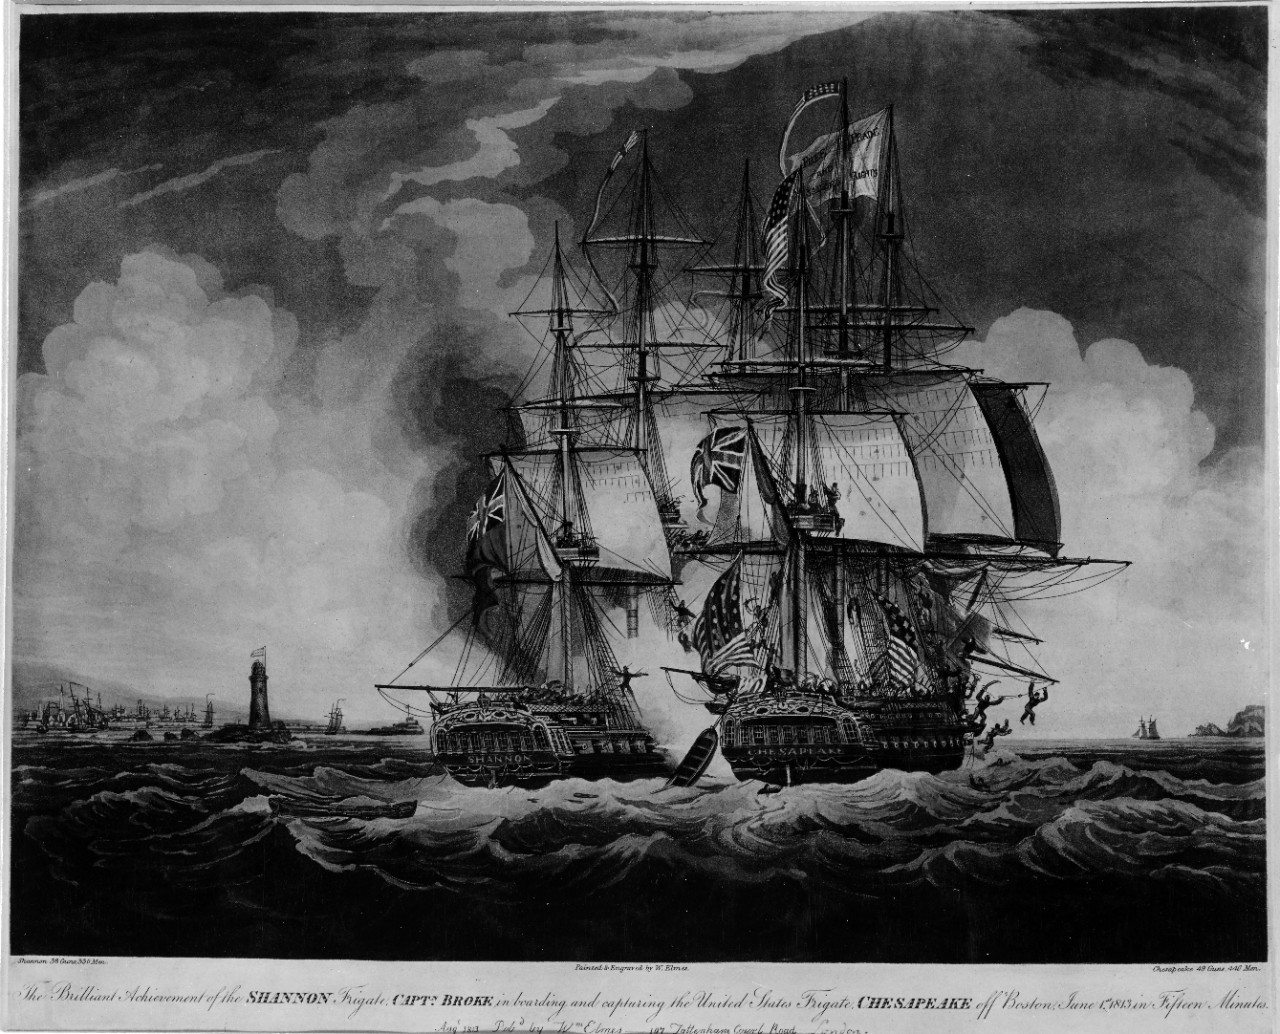 Engagement Between Chesapeake and HMS Shannon, 1 June 1813. 